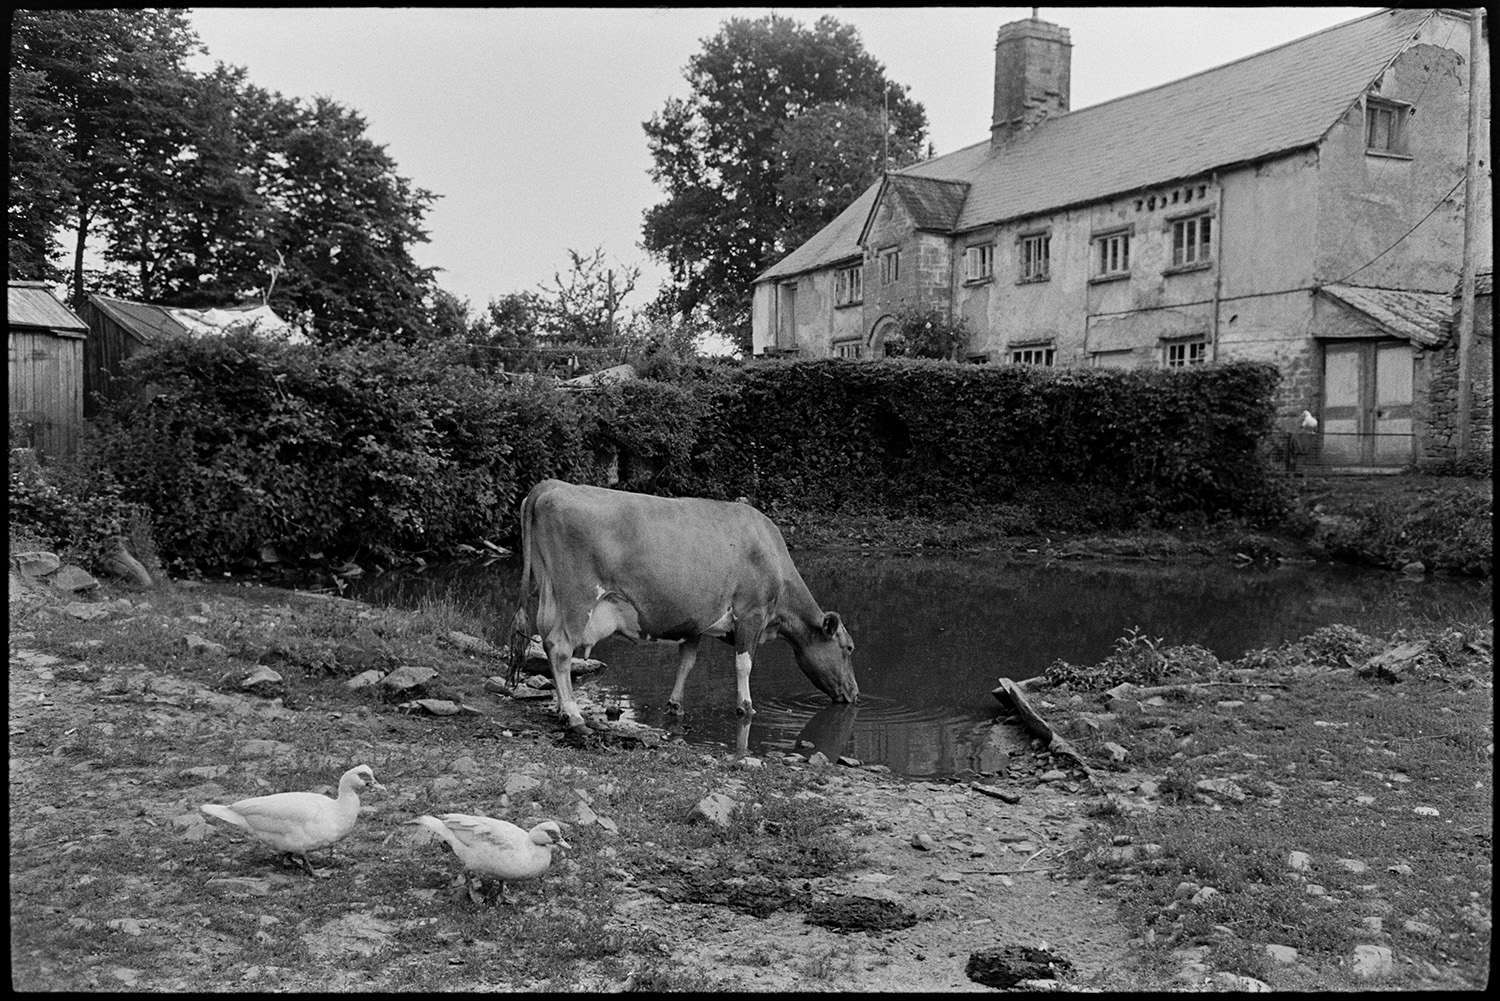 Cow drinking from pond in front of farm. 
[A cow drinking from a pond in front of the farmhouse at Deckport. Hatherleigh. Two Muscovy ducks are visible in the foreground.]